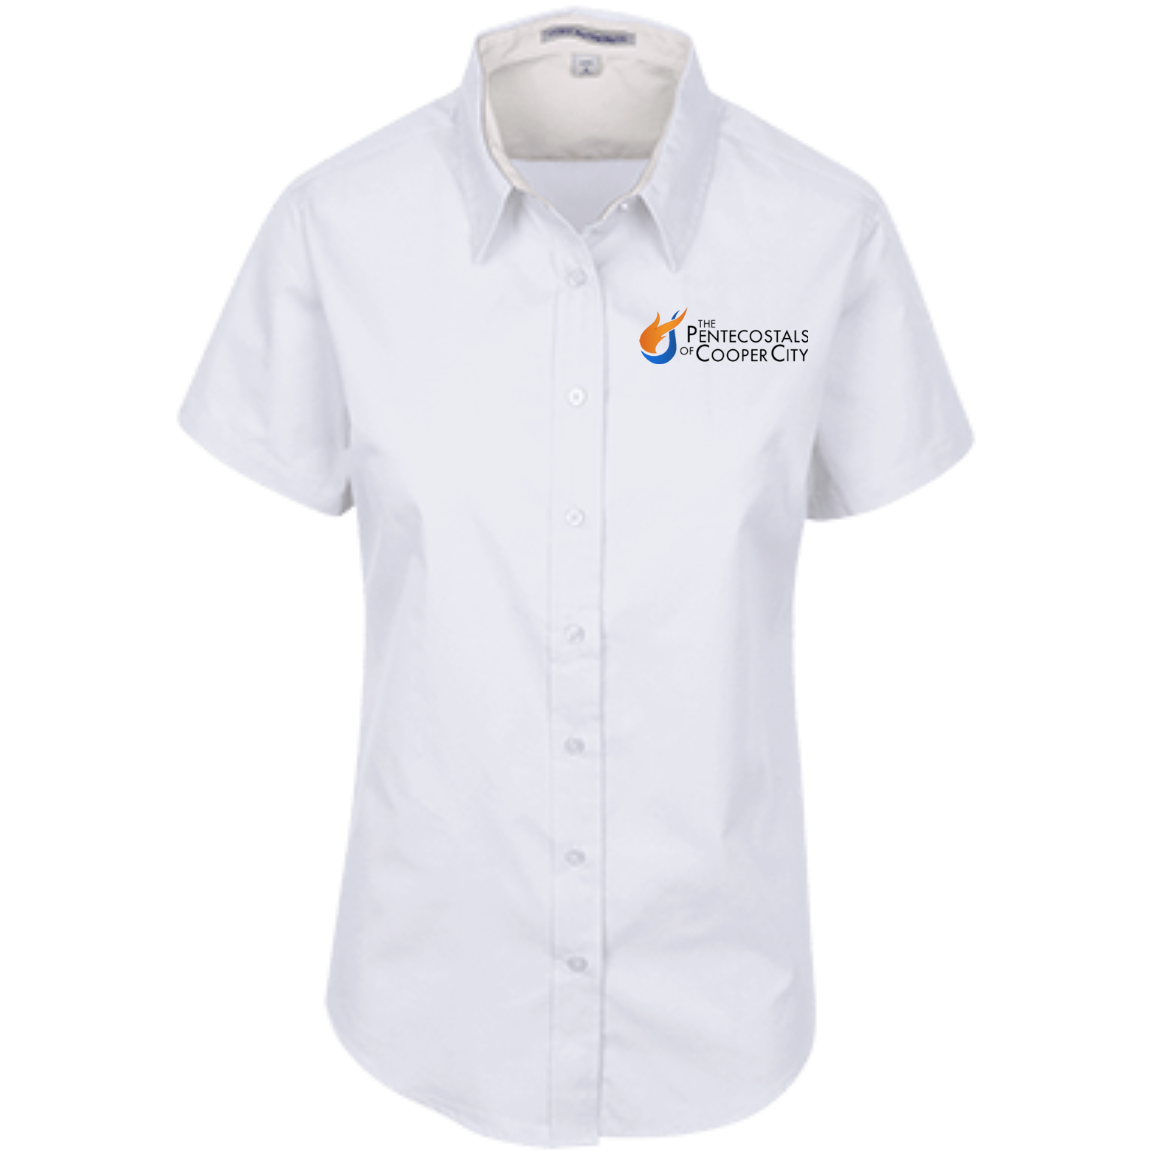 The Pentecostals Of Cooper City - Ladies' Short Sleeve Easy Care Shirt